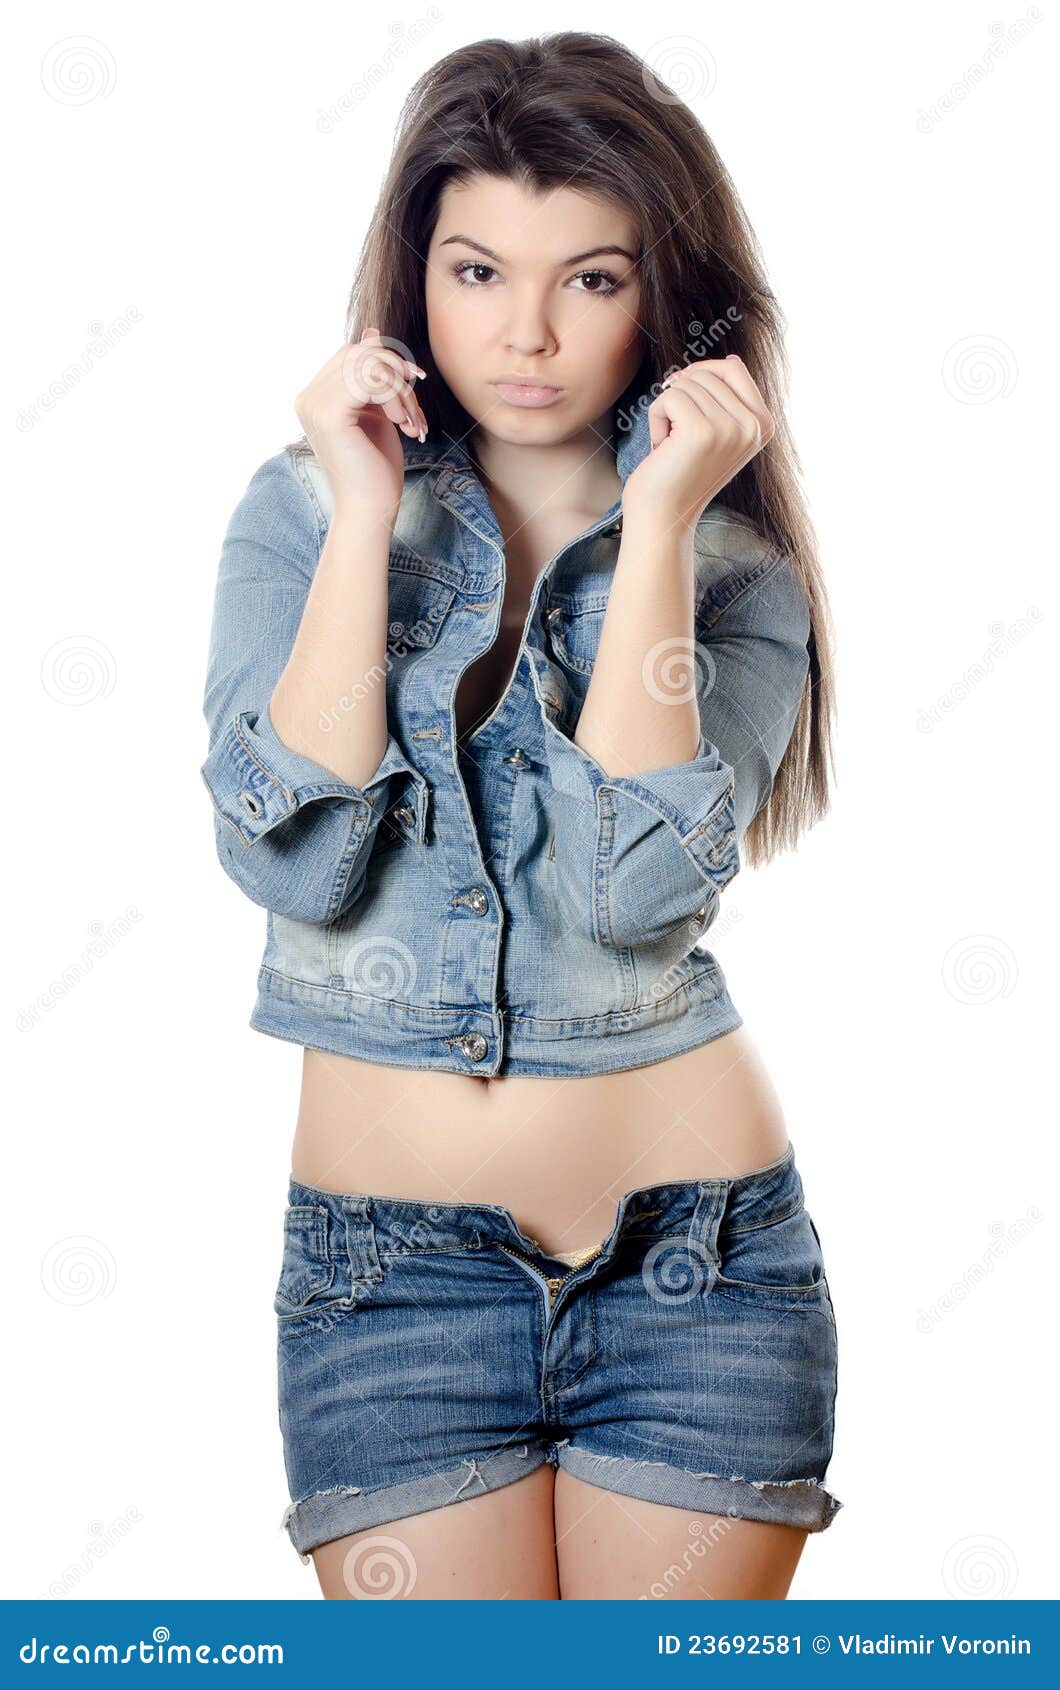 The Beautiful Girl in Jeans Shorts Stock Image - Image of health ...